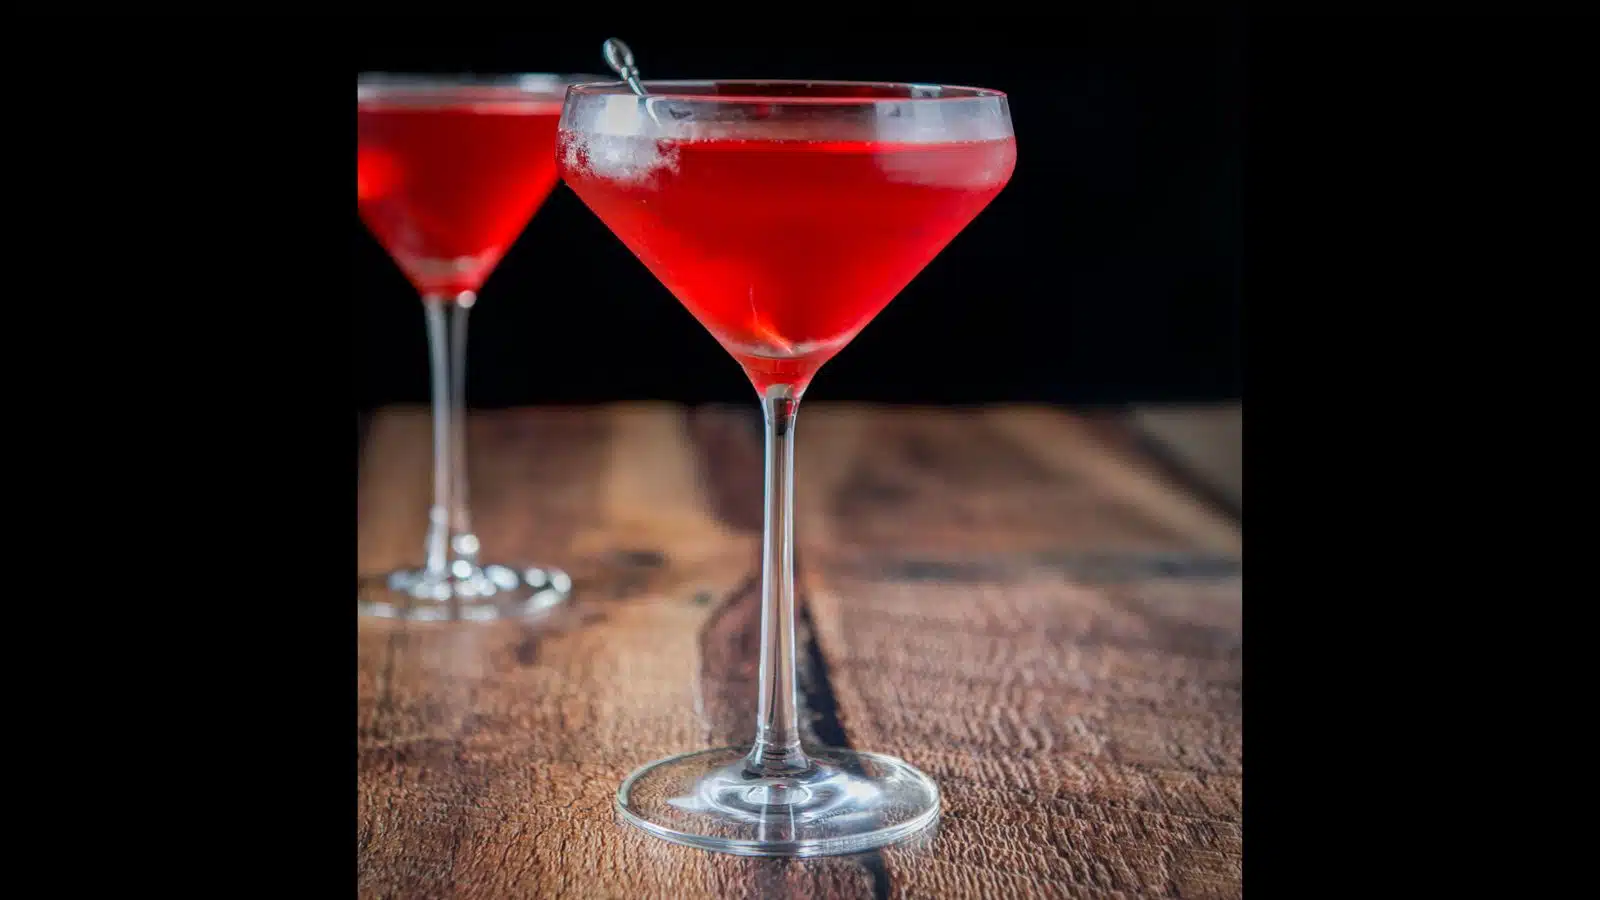 A curved martini glass in front of a classic glass filled with the red cocktail